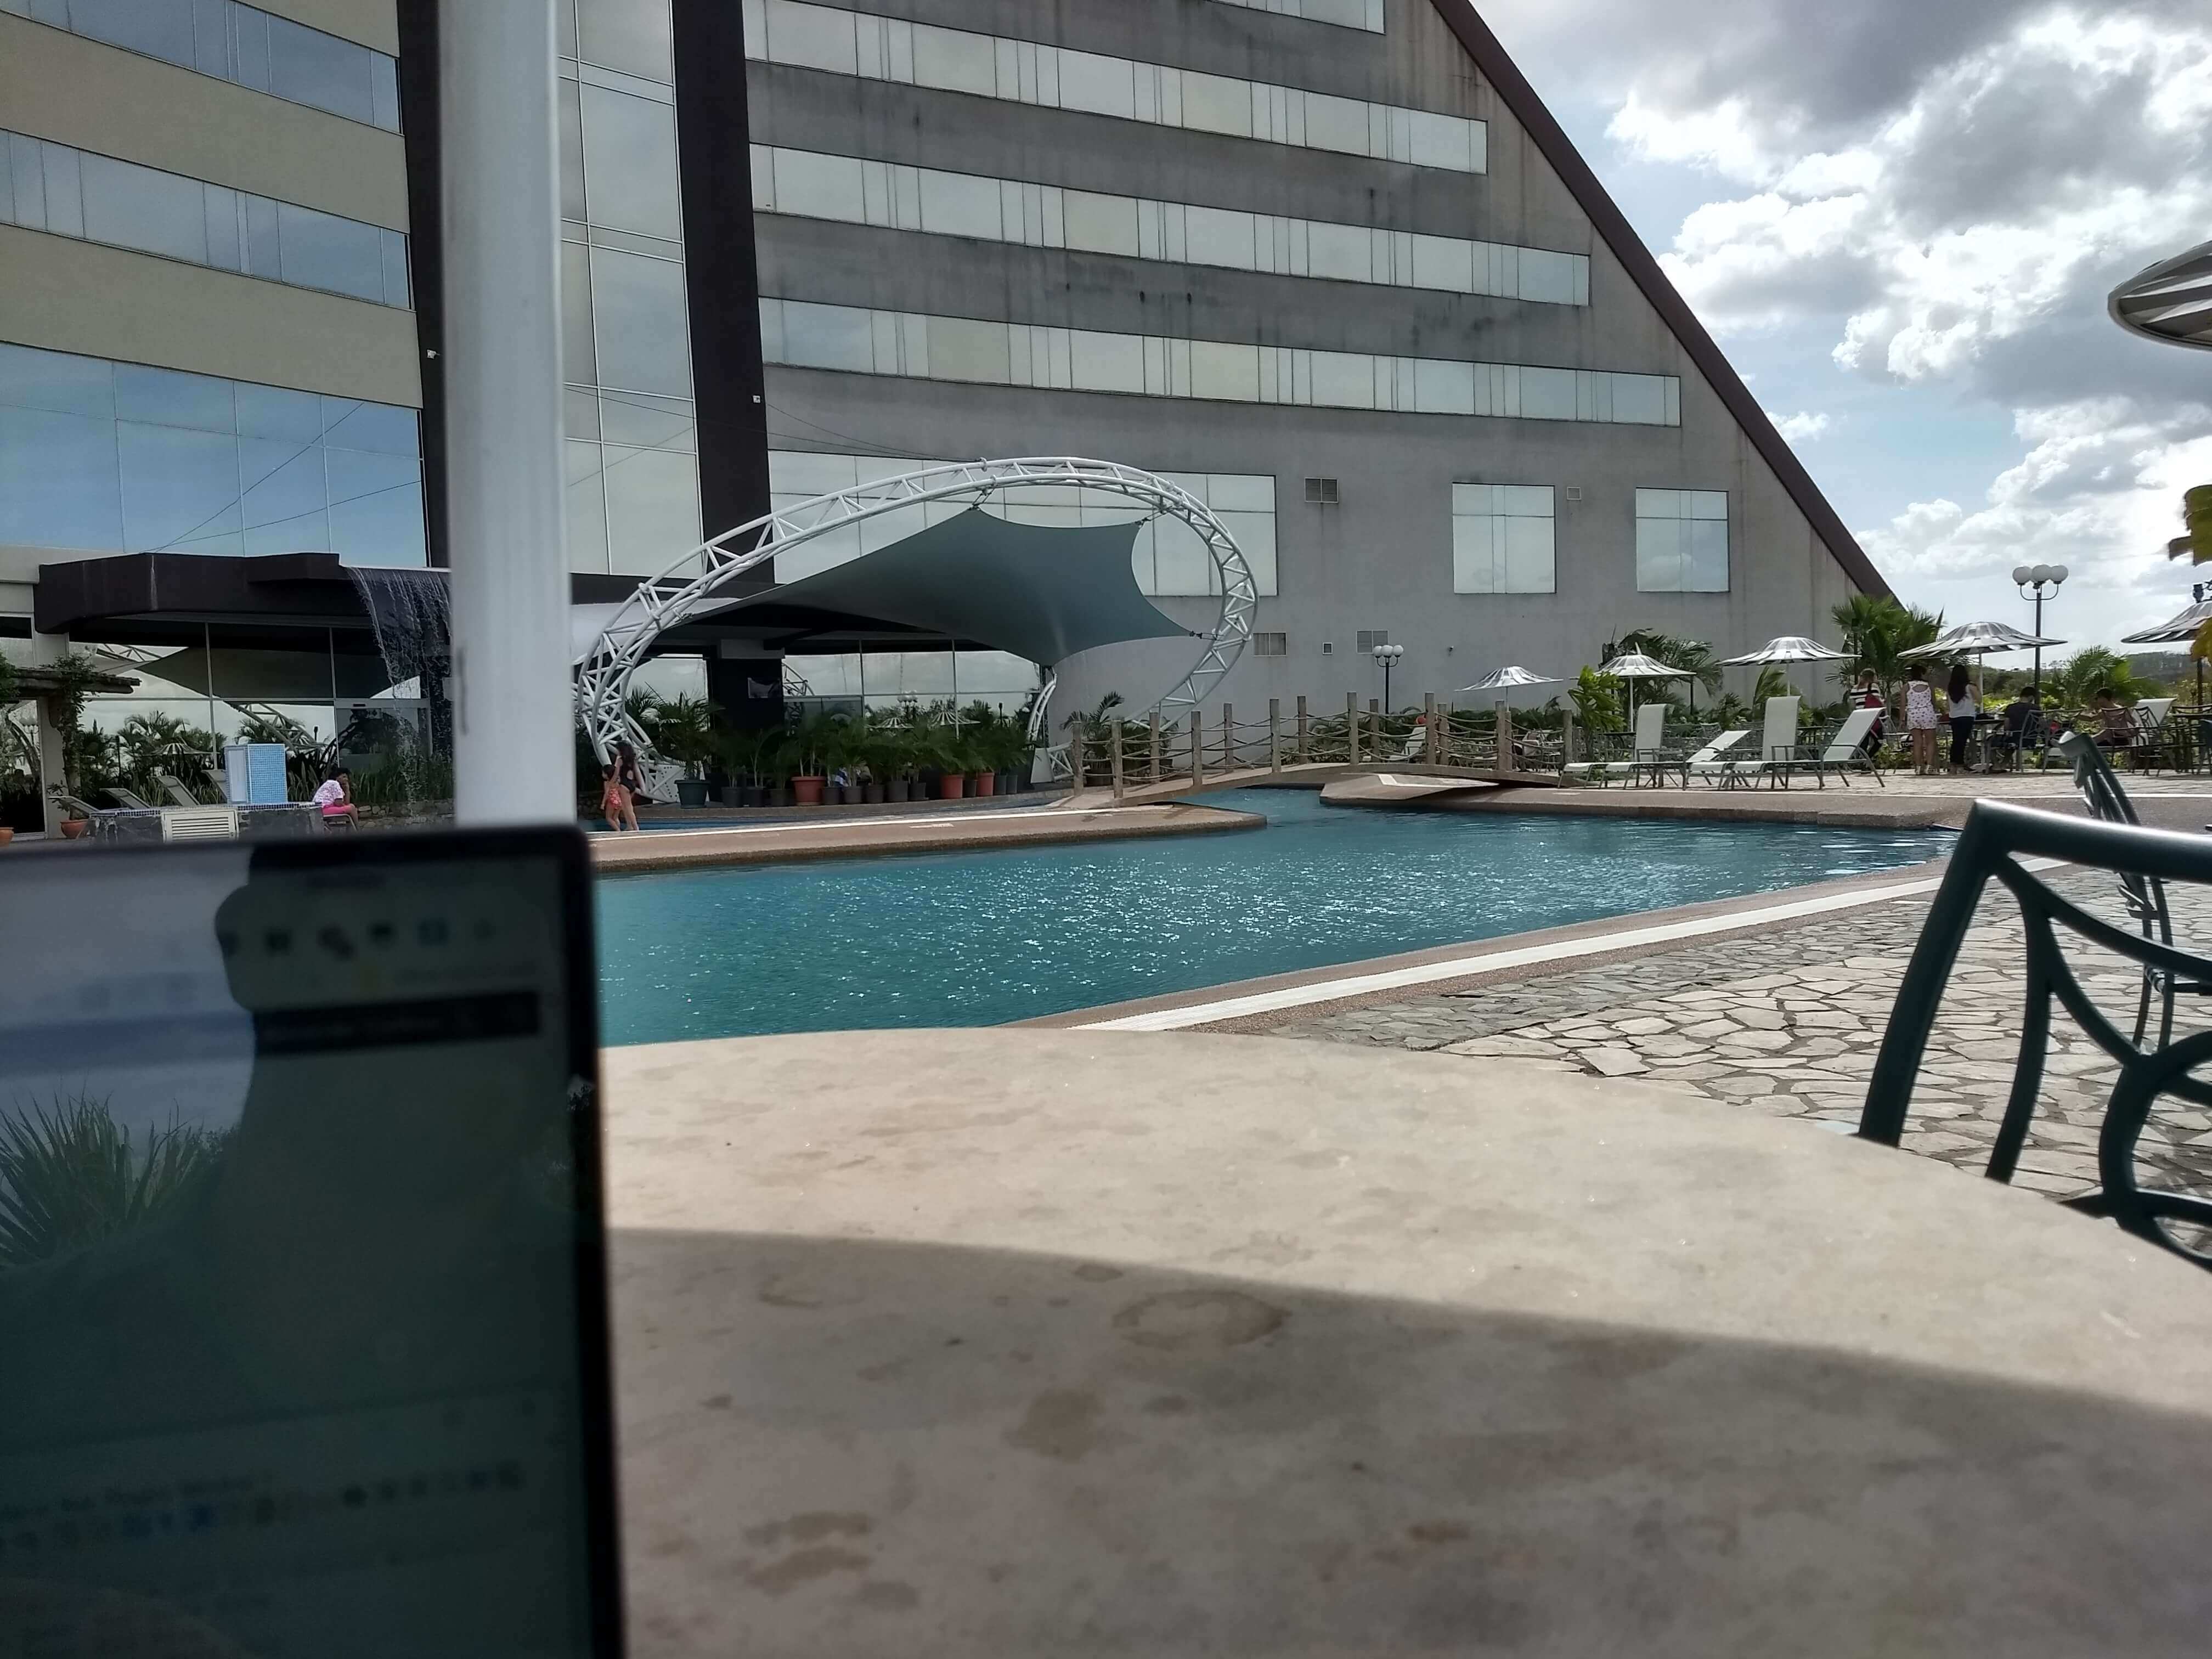 Working from the poolside.